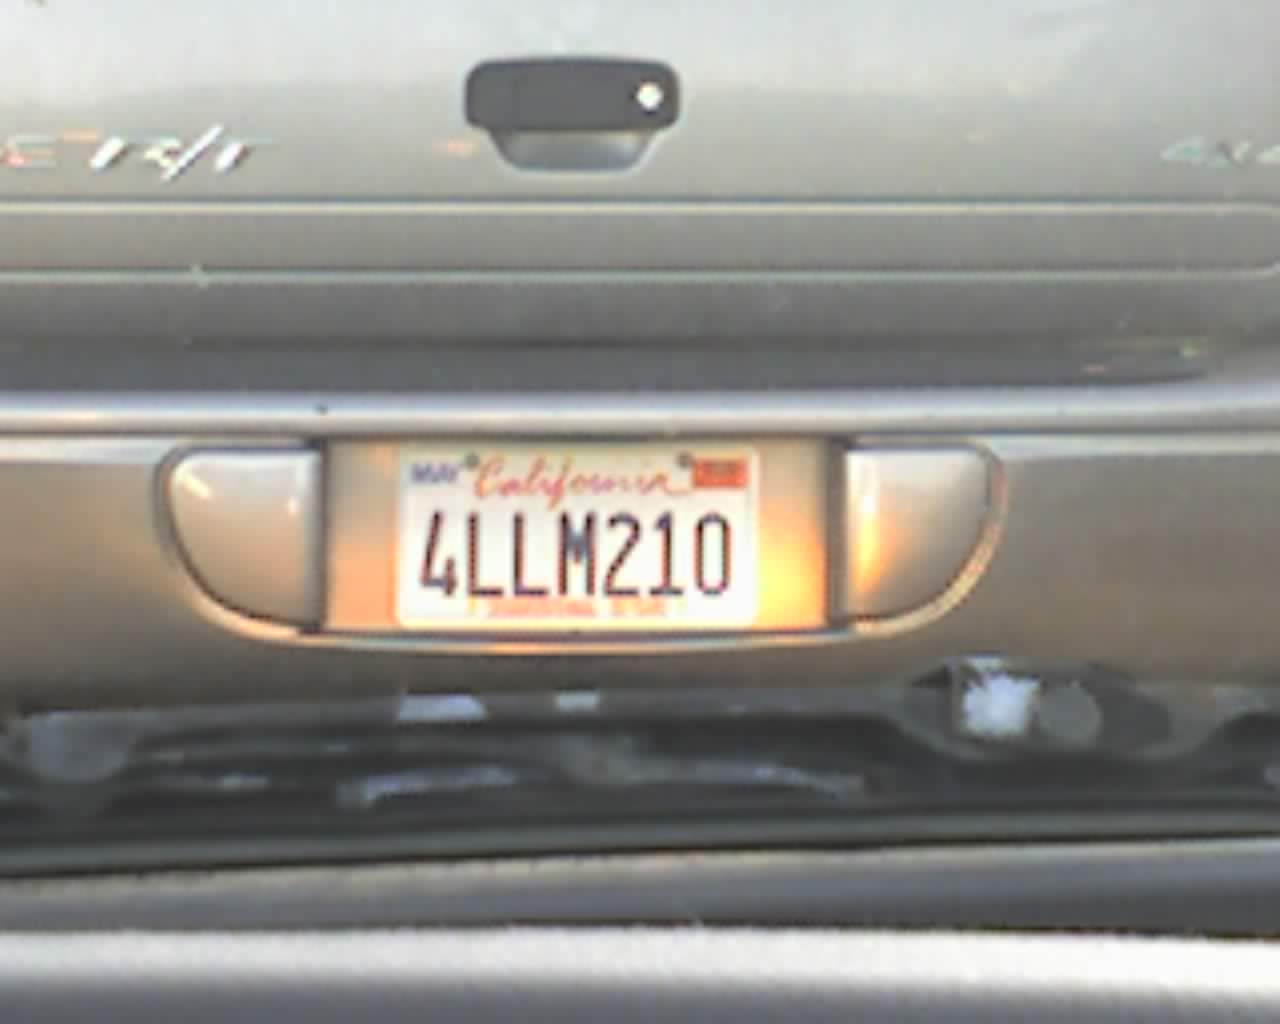 bad driver license plate